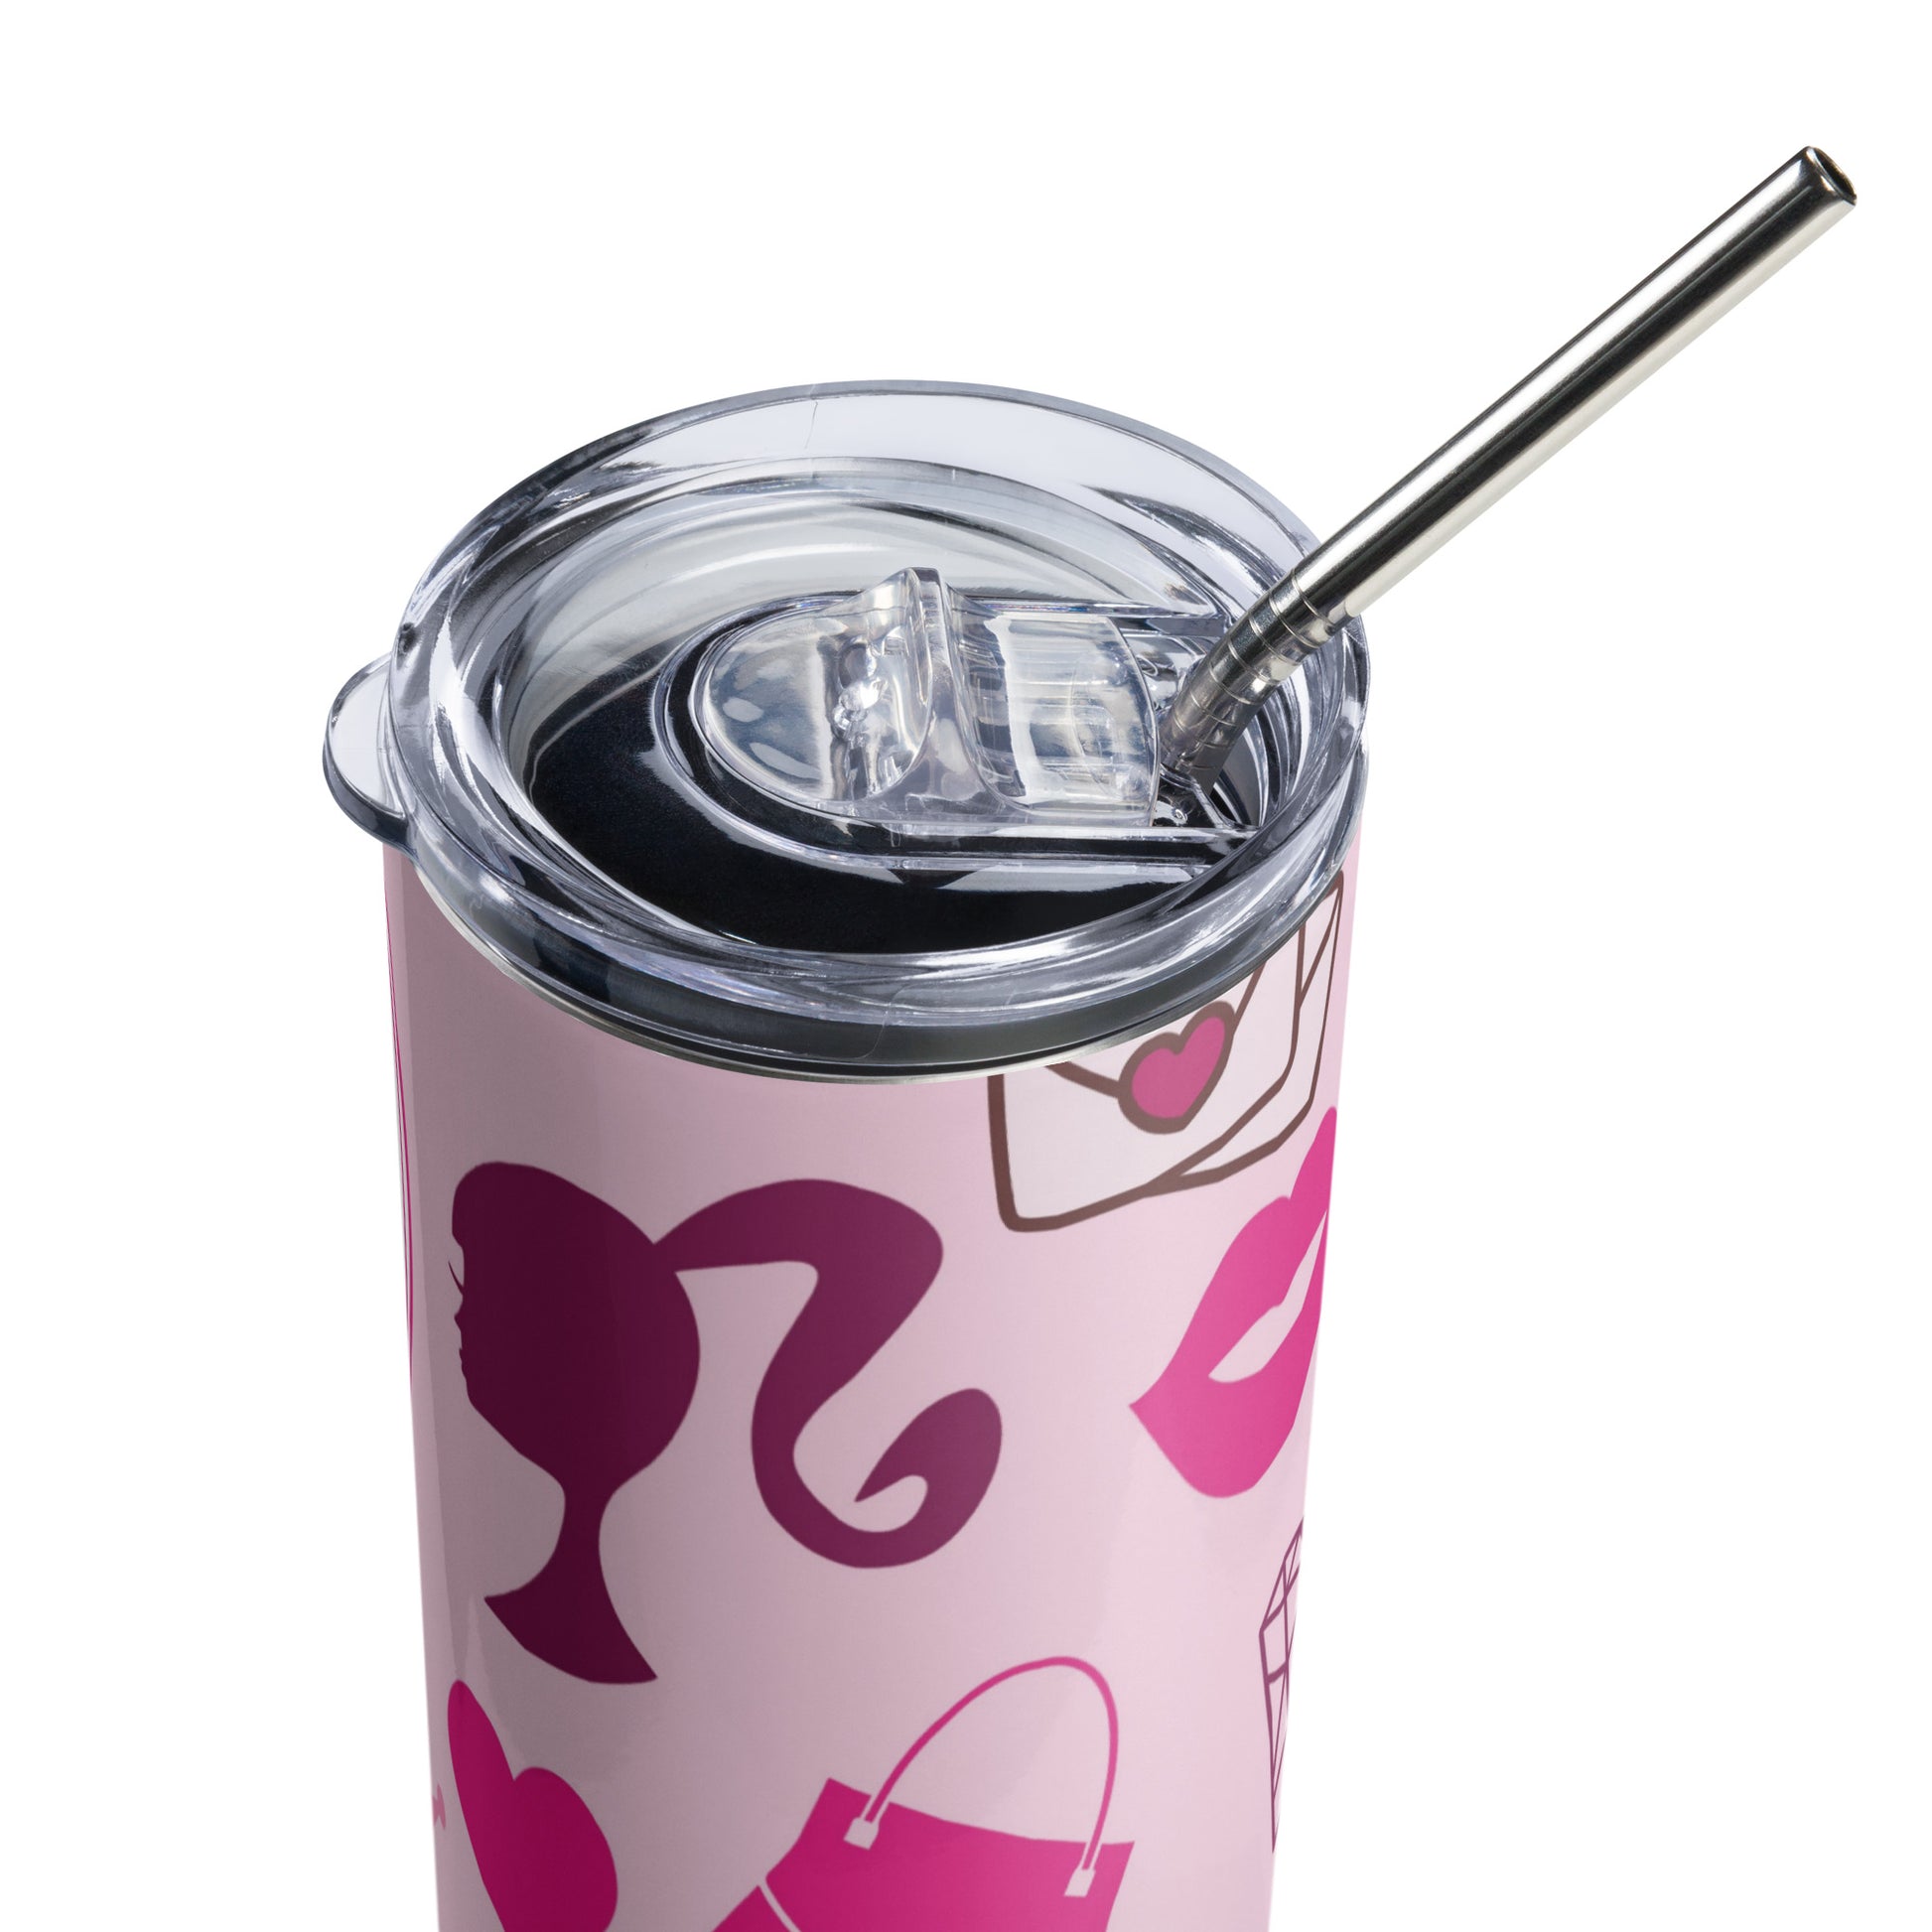 Barbie Themed Stainless steel tumbler CedarHill Country Market